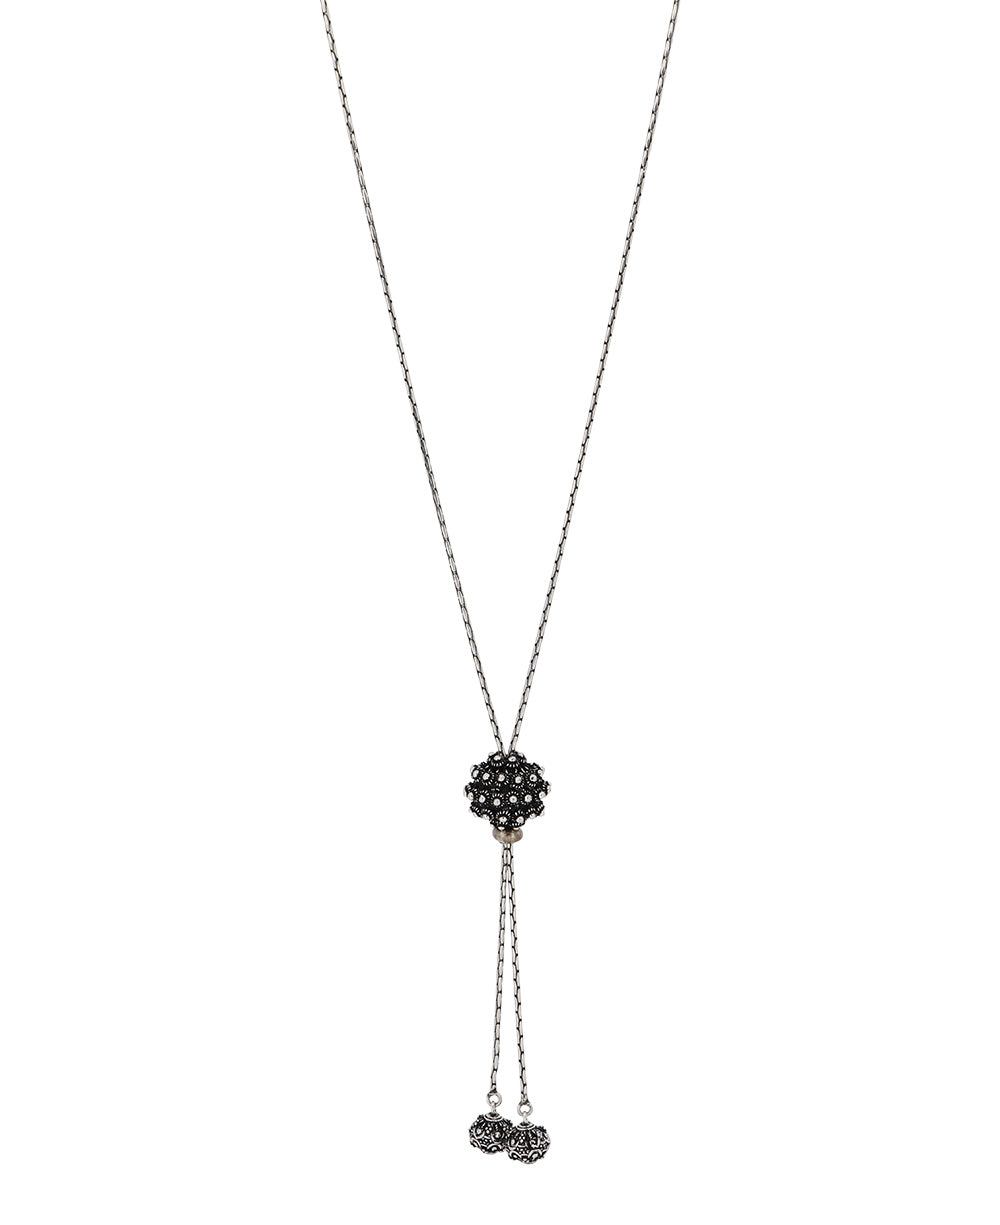 Hill-Tribe silver lariat necklace with floral sphere and beaded ends